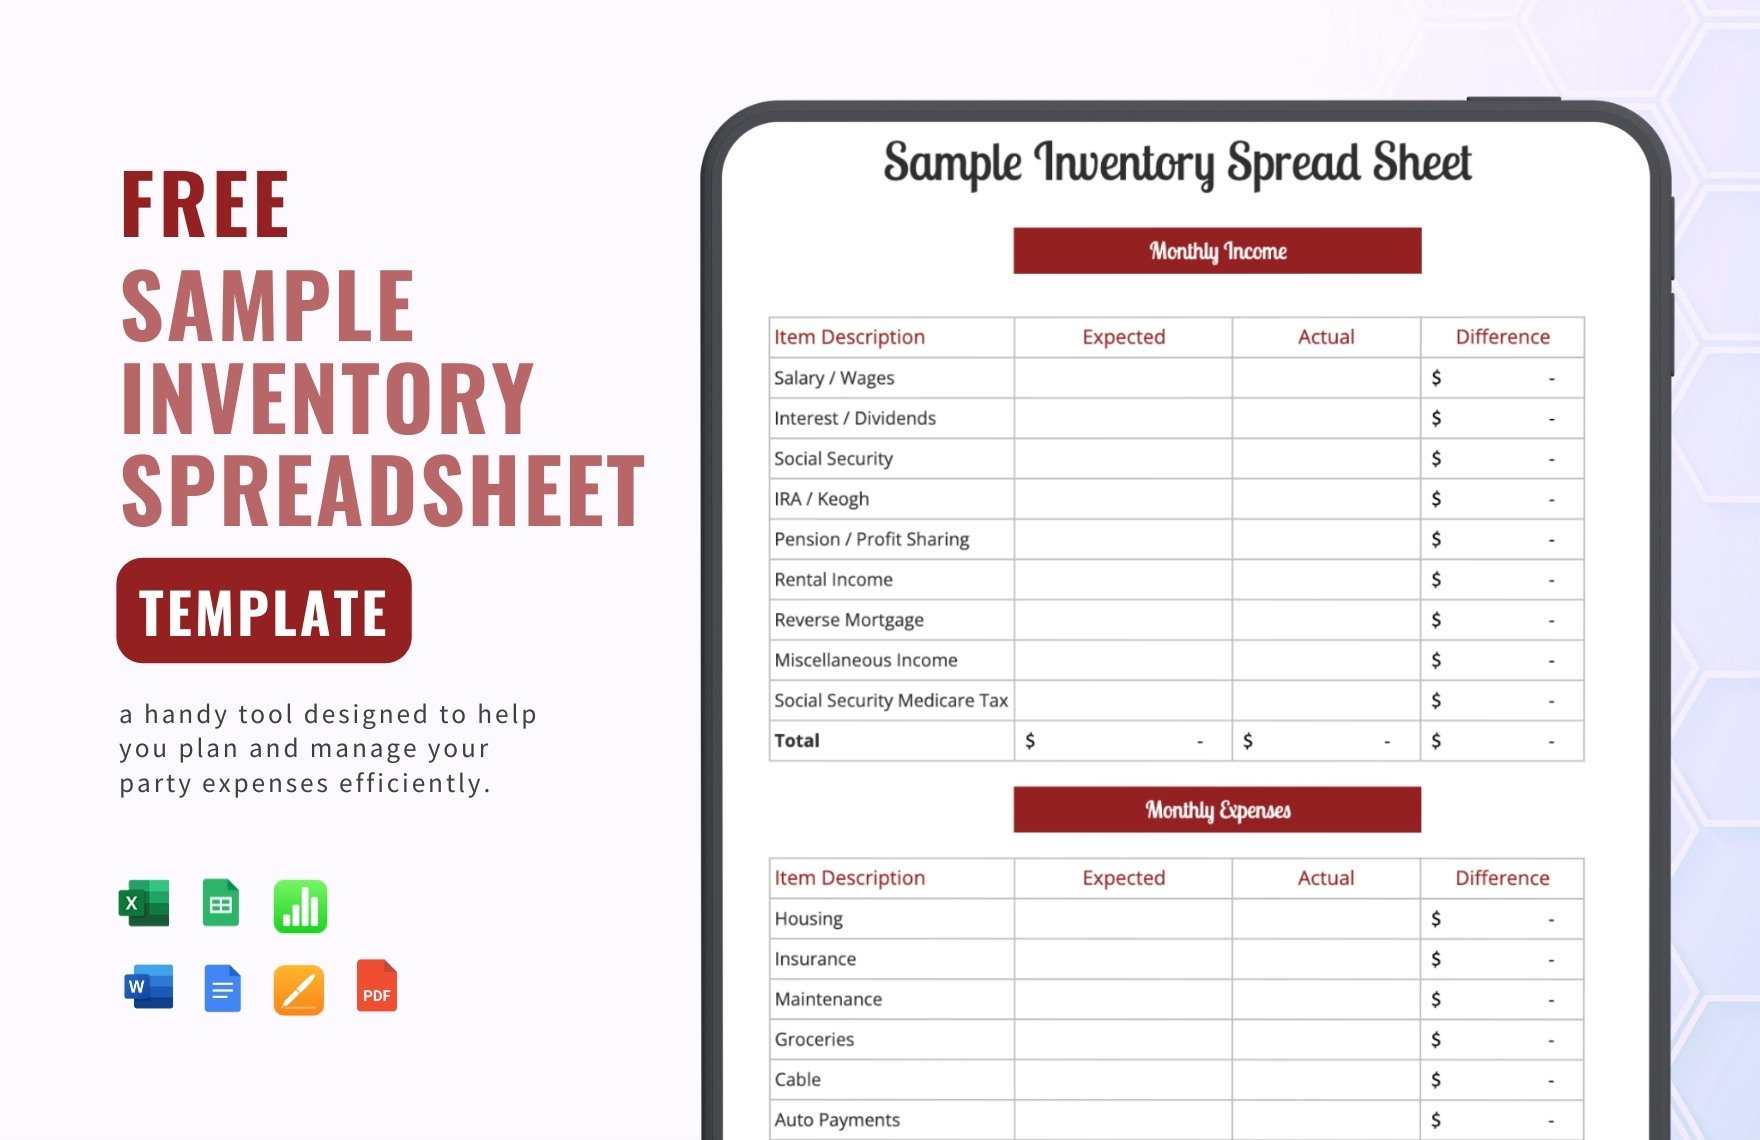 Free Sample Inventory Spreadsheet Template in Word, Google Docs, Excel, PDF, Google Sheets, Apple Pages, Apple Numbers